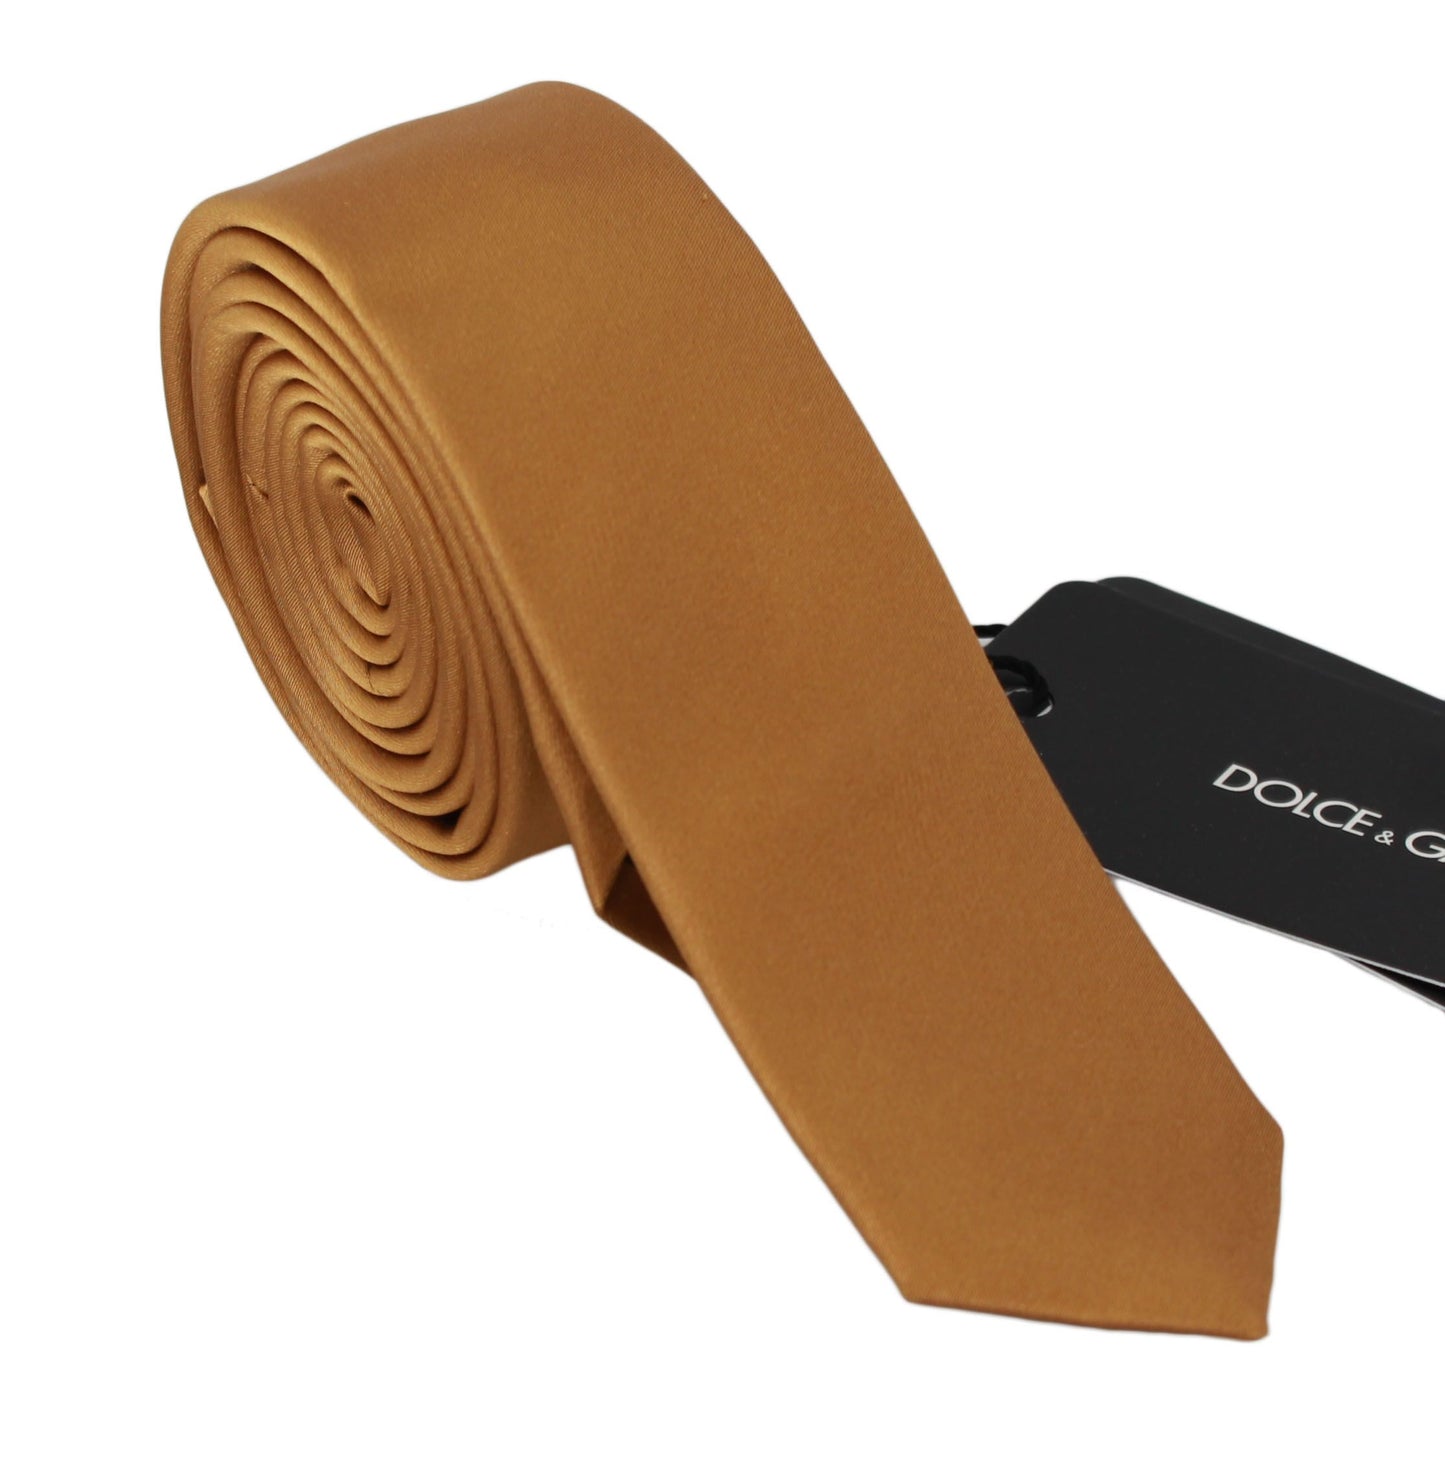 Elegant Silk Brown Tie for Sophisticated Style